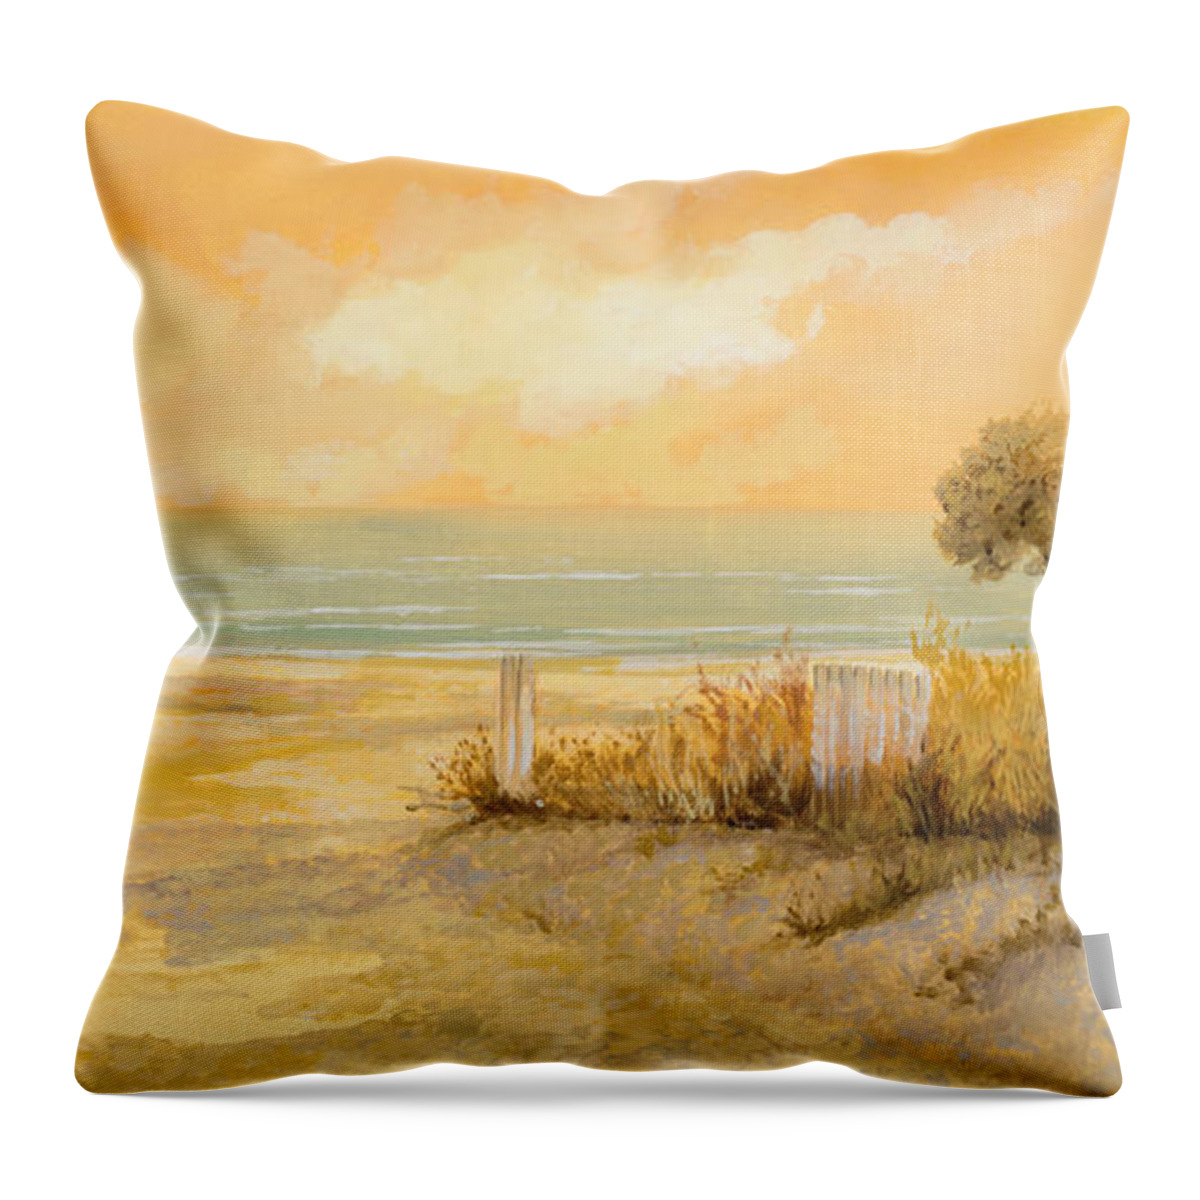 Beach Throw Pillow featuring the painting Verso La Spiaggia by Guido Borelli